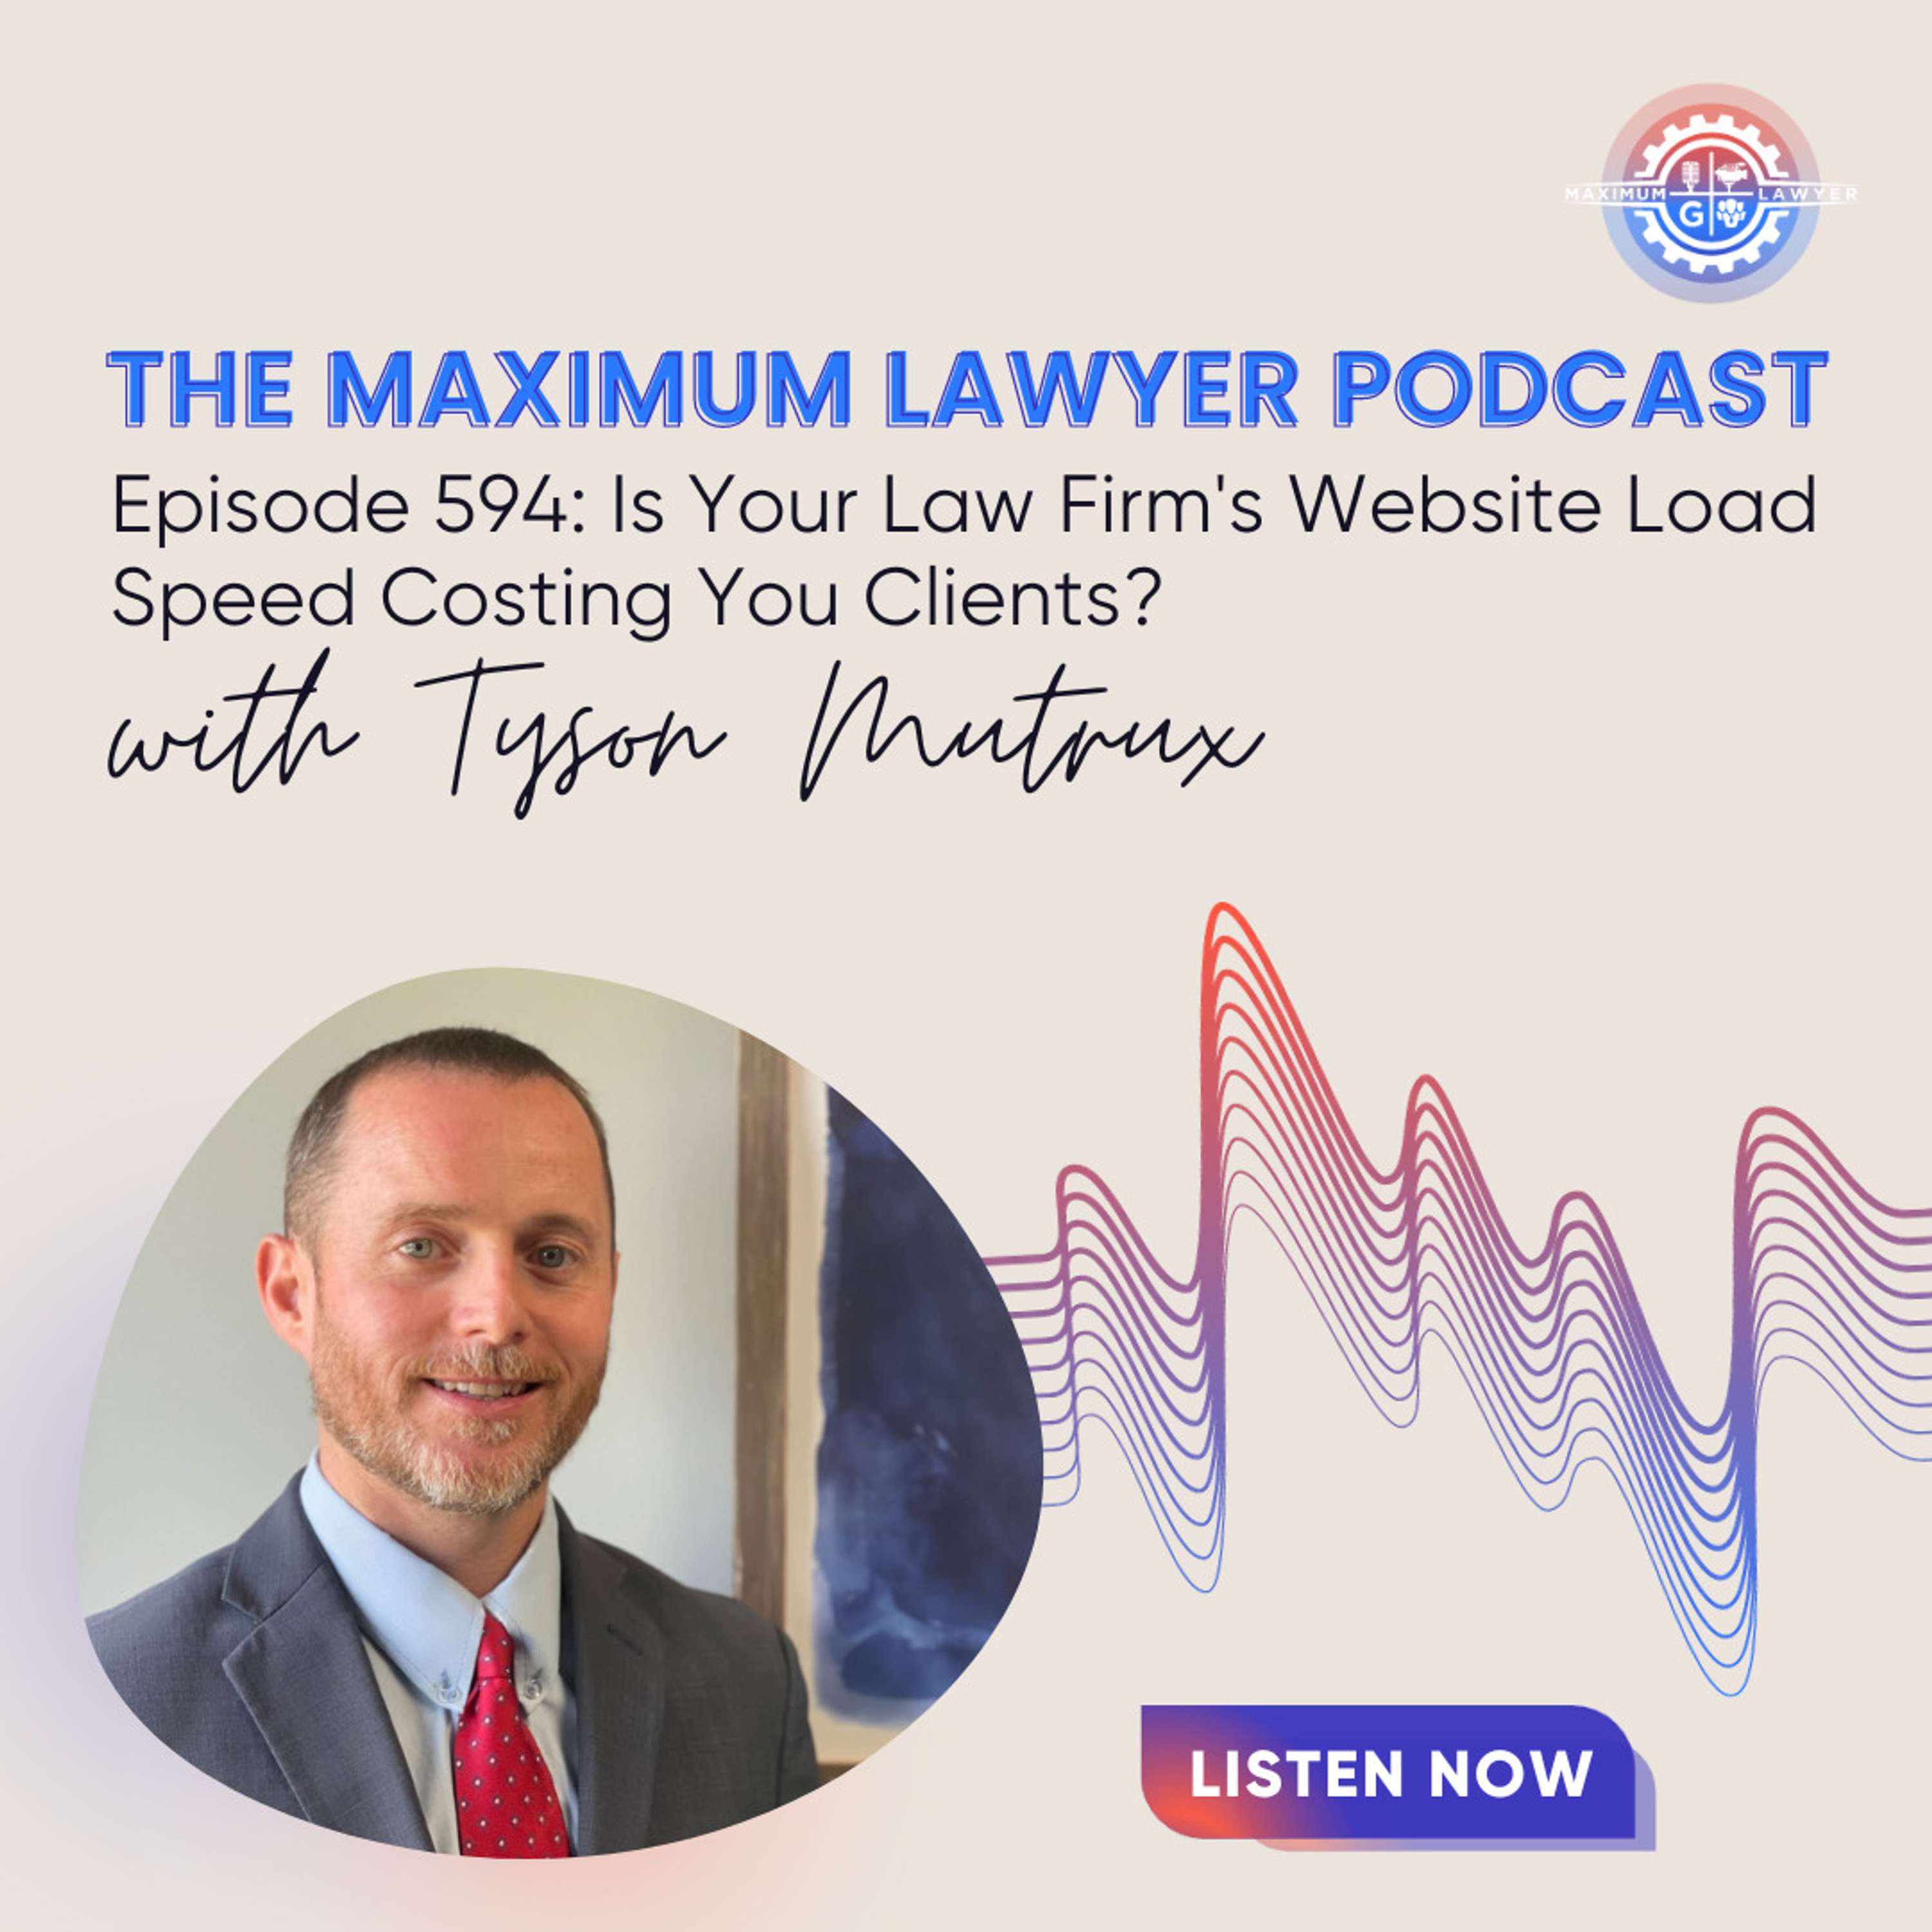 Is Your Law Firm's Website Load Speed Costing You Clients?